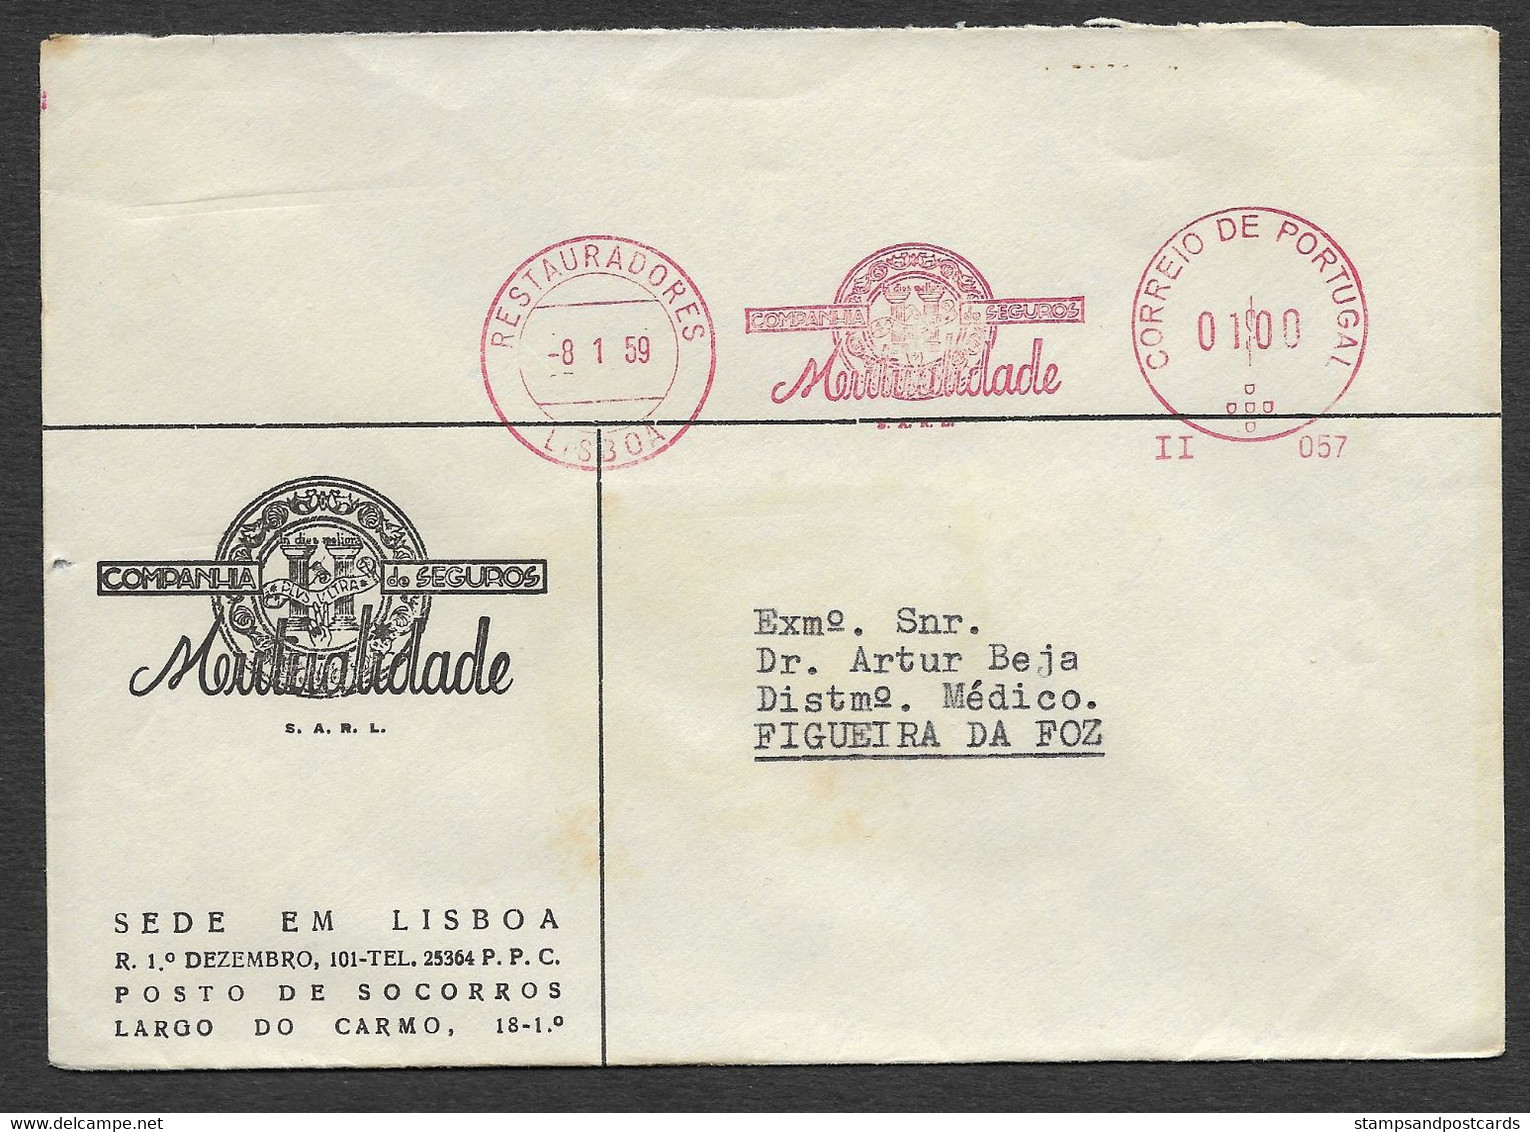 Portugal Lettre Assurance Mutualidade Vignette EMA Cachet Rouge 1959 Cover Cinderella Insurance Co. Franking Meter - Lettres & Documents